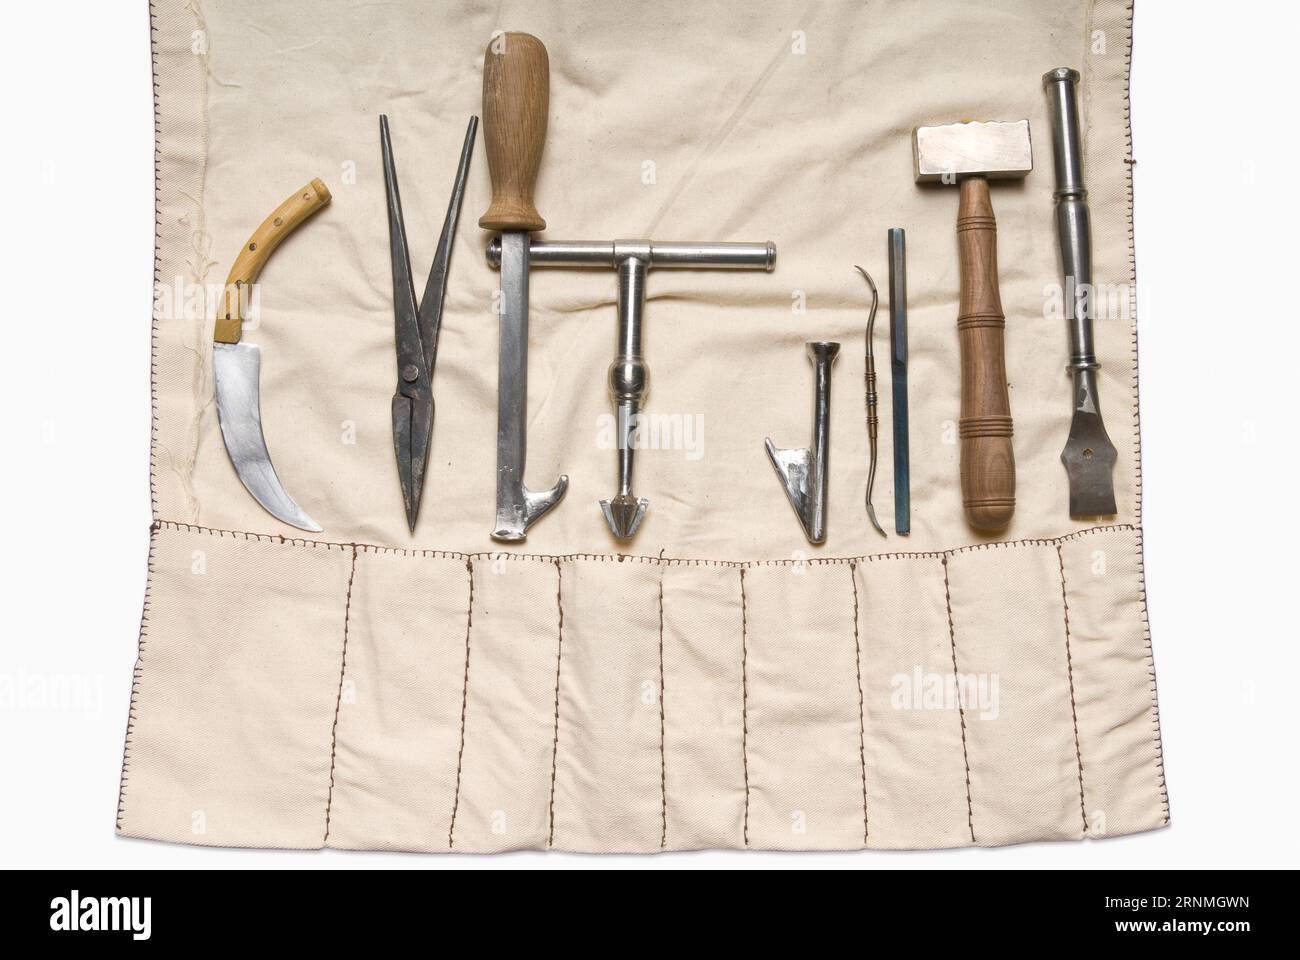 Trephining and Orthopaedic Medieval Medical Instruments Stock Photo